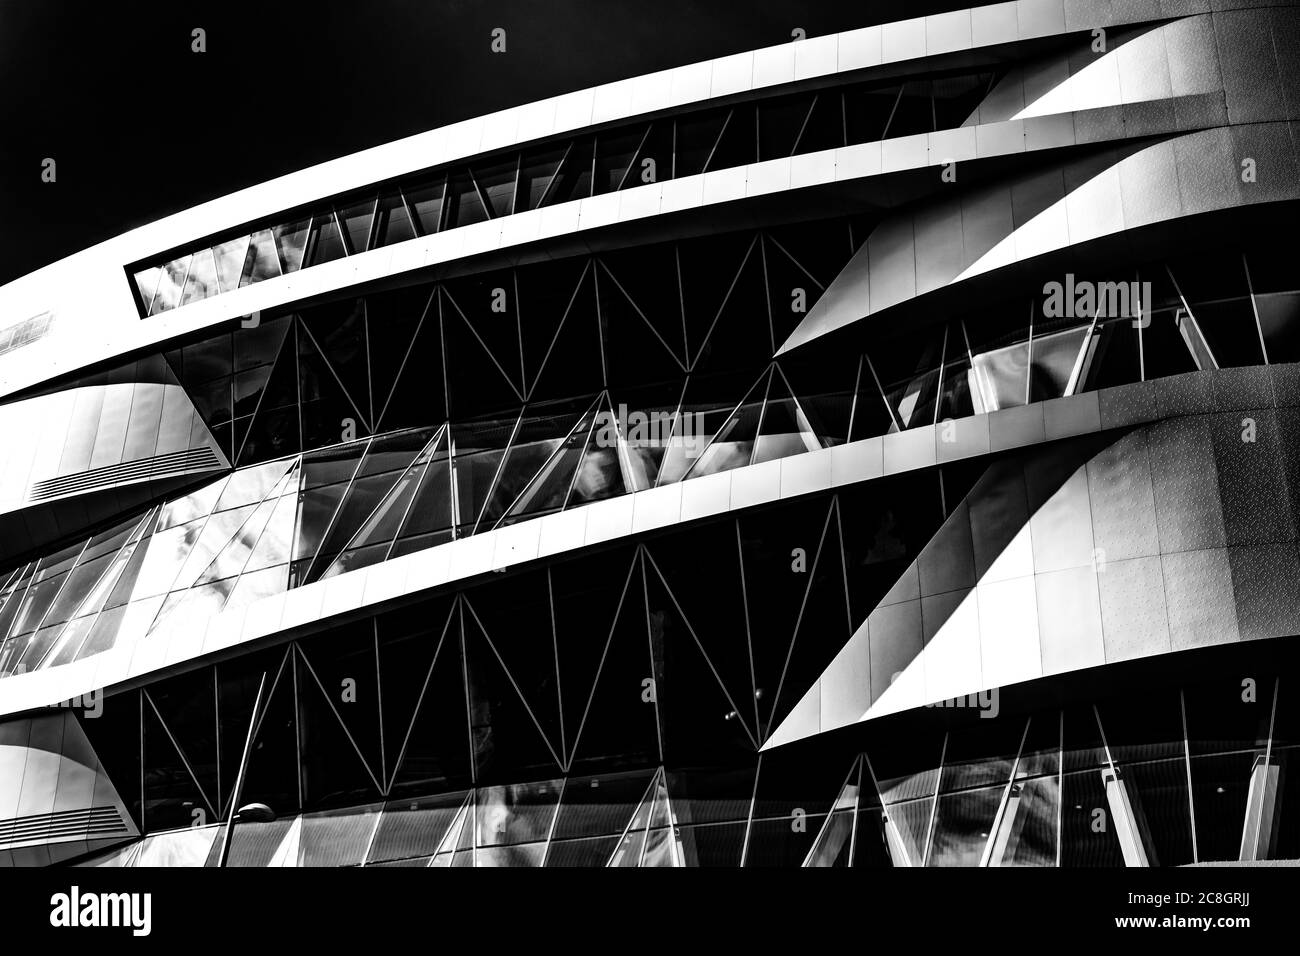 Stuttgart, BW / Germany - 21 July 2020: black and white detail view of the Mercedes-Benz Museum in Stuttgart Stock Photo